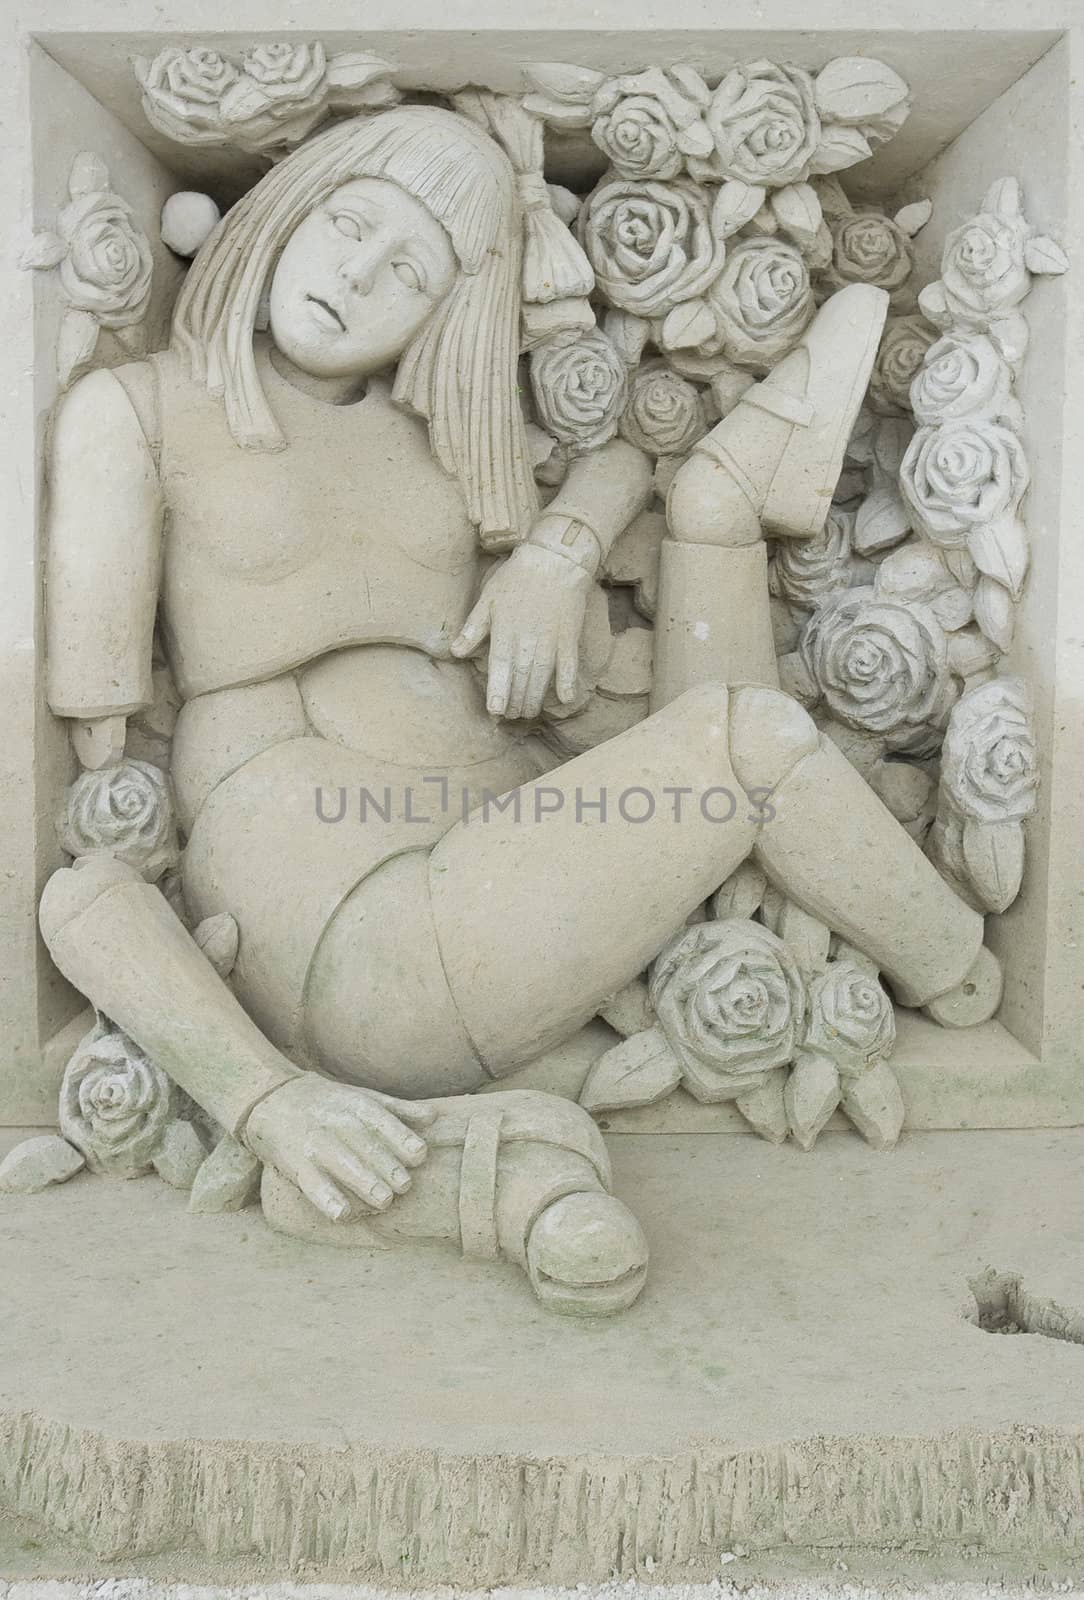 NITRA, SLOVAKIA - JULY 20: Doll in the box by the Japanese Katsuhiko Chaen at the Golden Sand Festival July 3 - August 14, 2011 in Nitra, Slovakia. Chaen is Japans most famous sand sculptor graduated from Musashino Academy of Art, Tokyo.